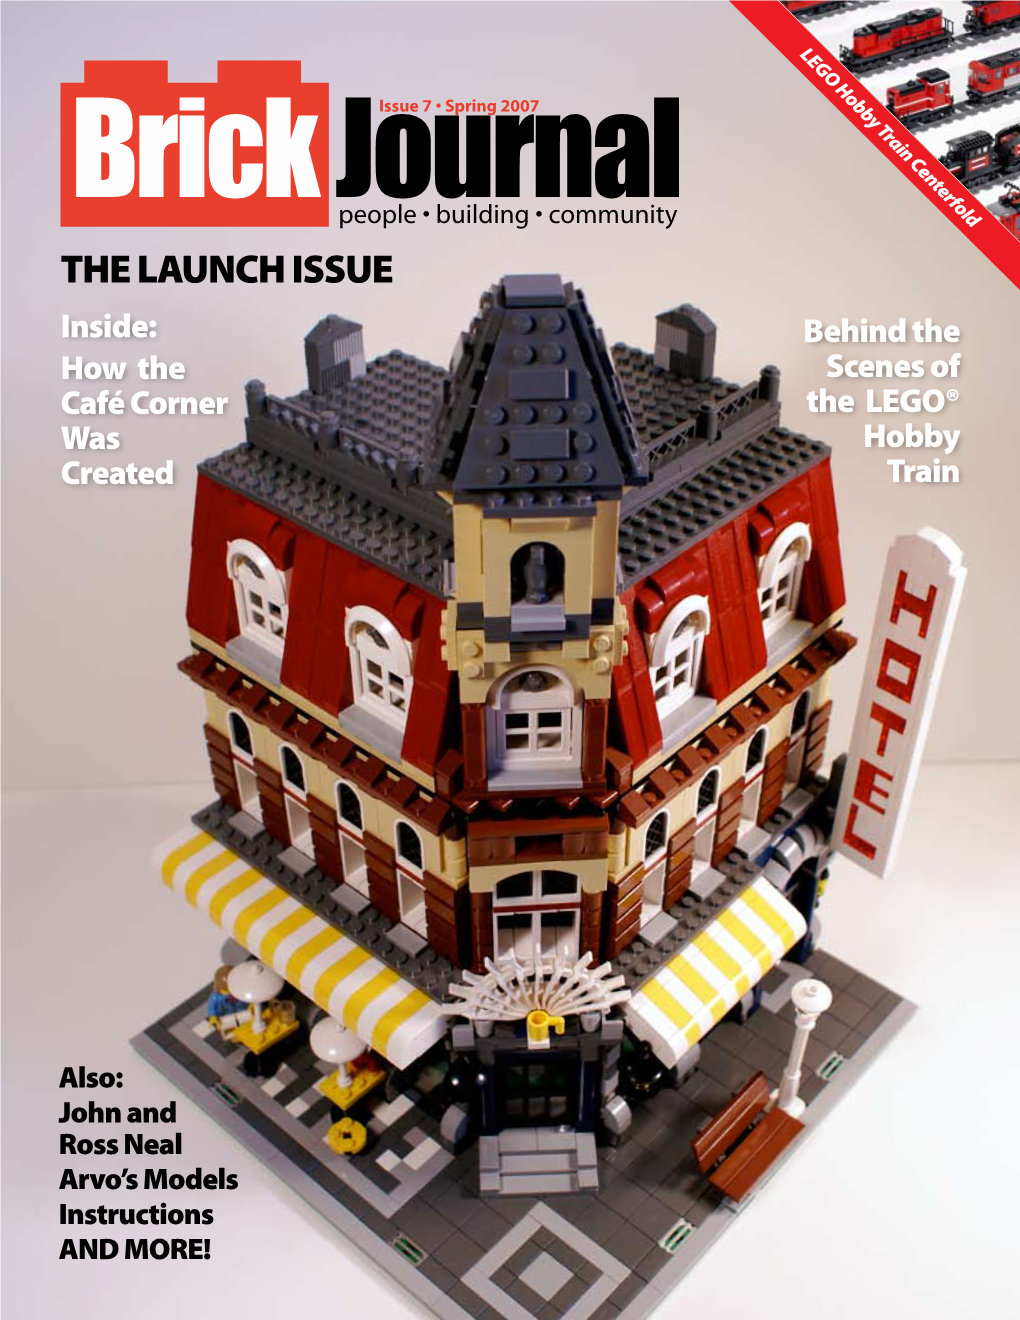 THE LAUNCH ISSUE Inside: Behind the How the Scenes of Café Corner the LEGO® Was Hobby Created Train